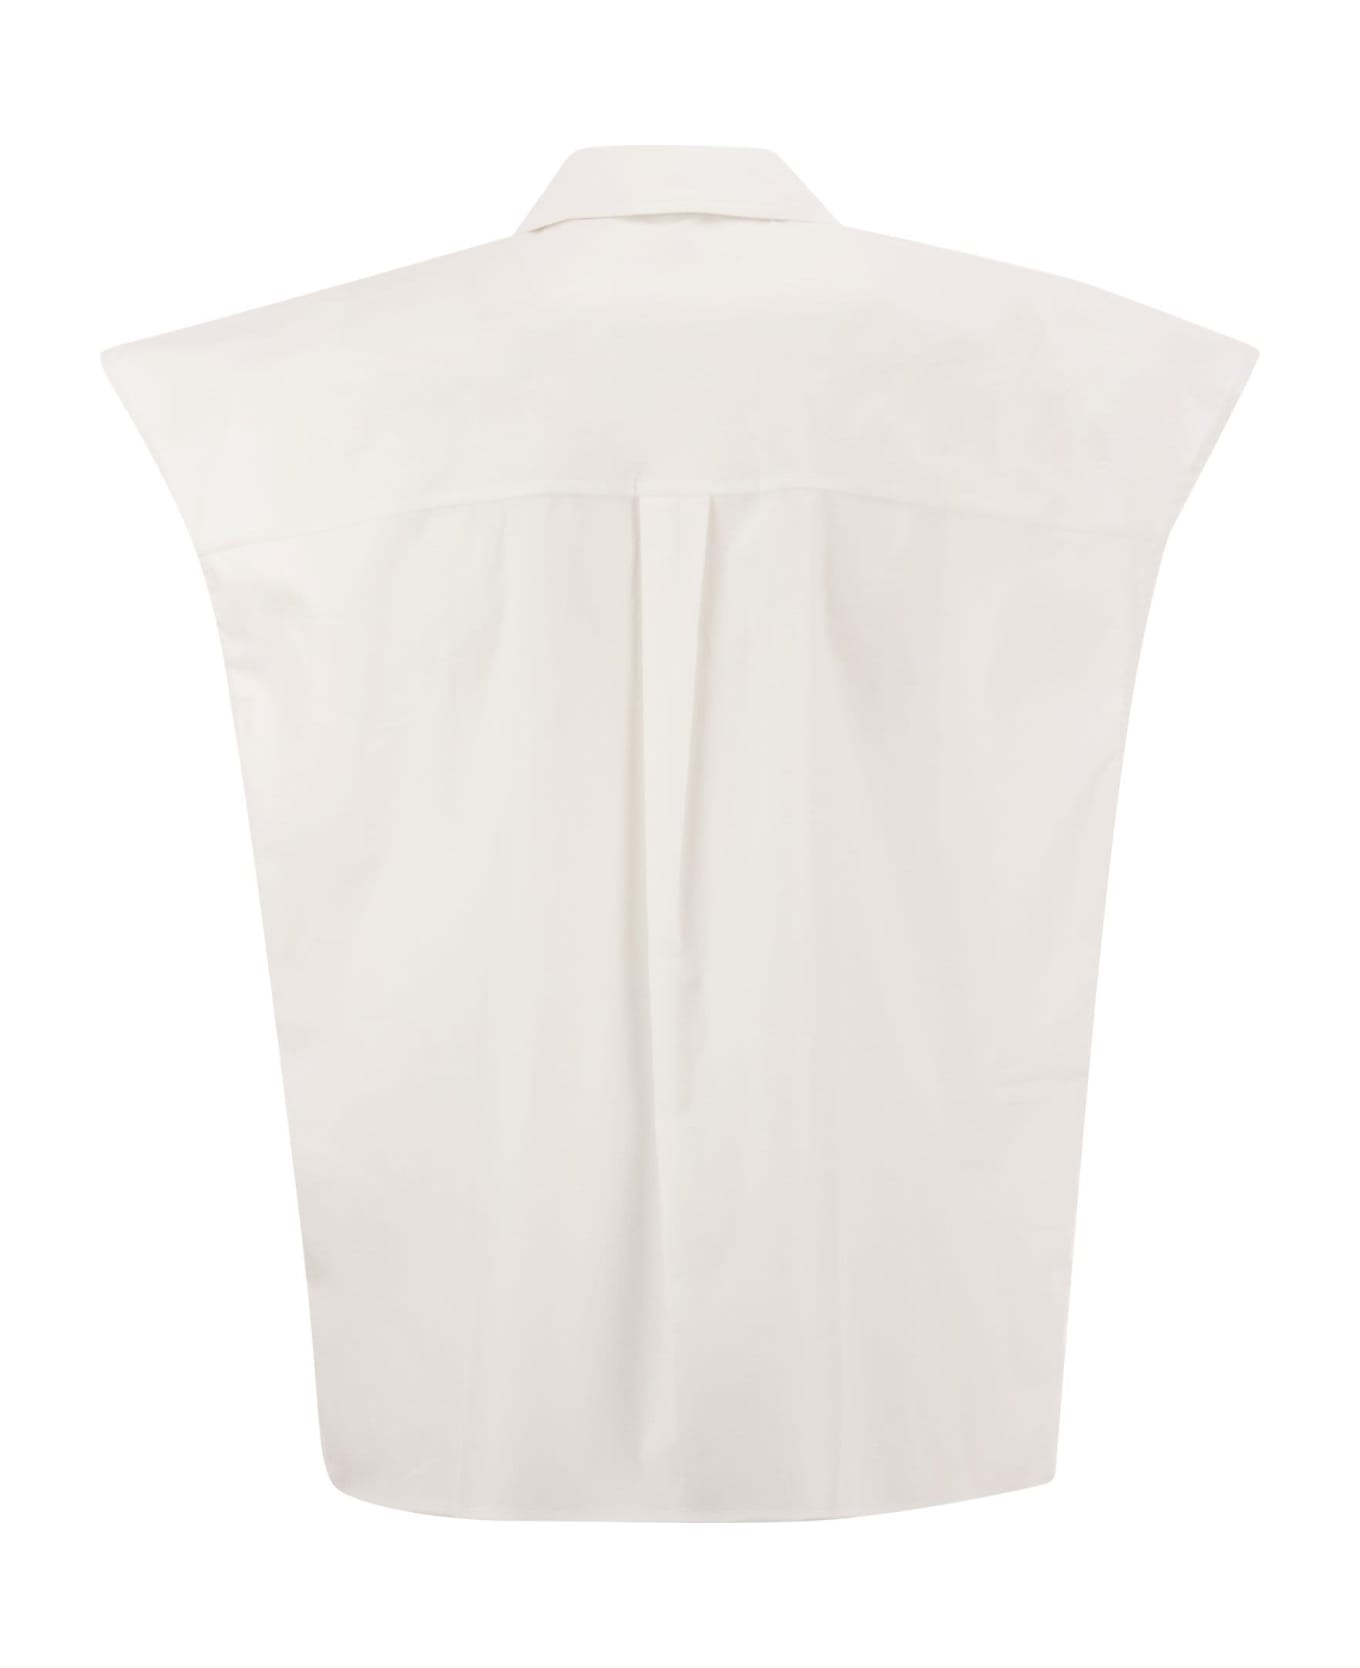 Woolrich Short-sleeved Blouse In Pure Cotton Poplin - Bright White シャツ